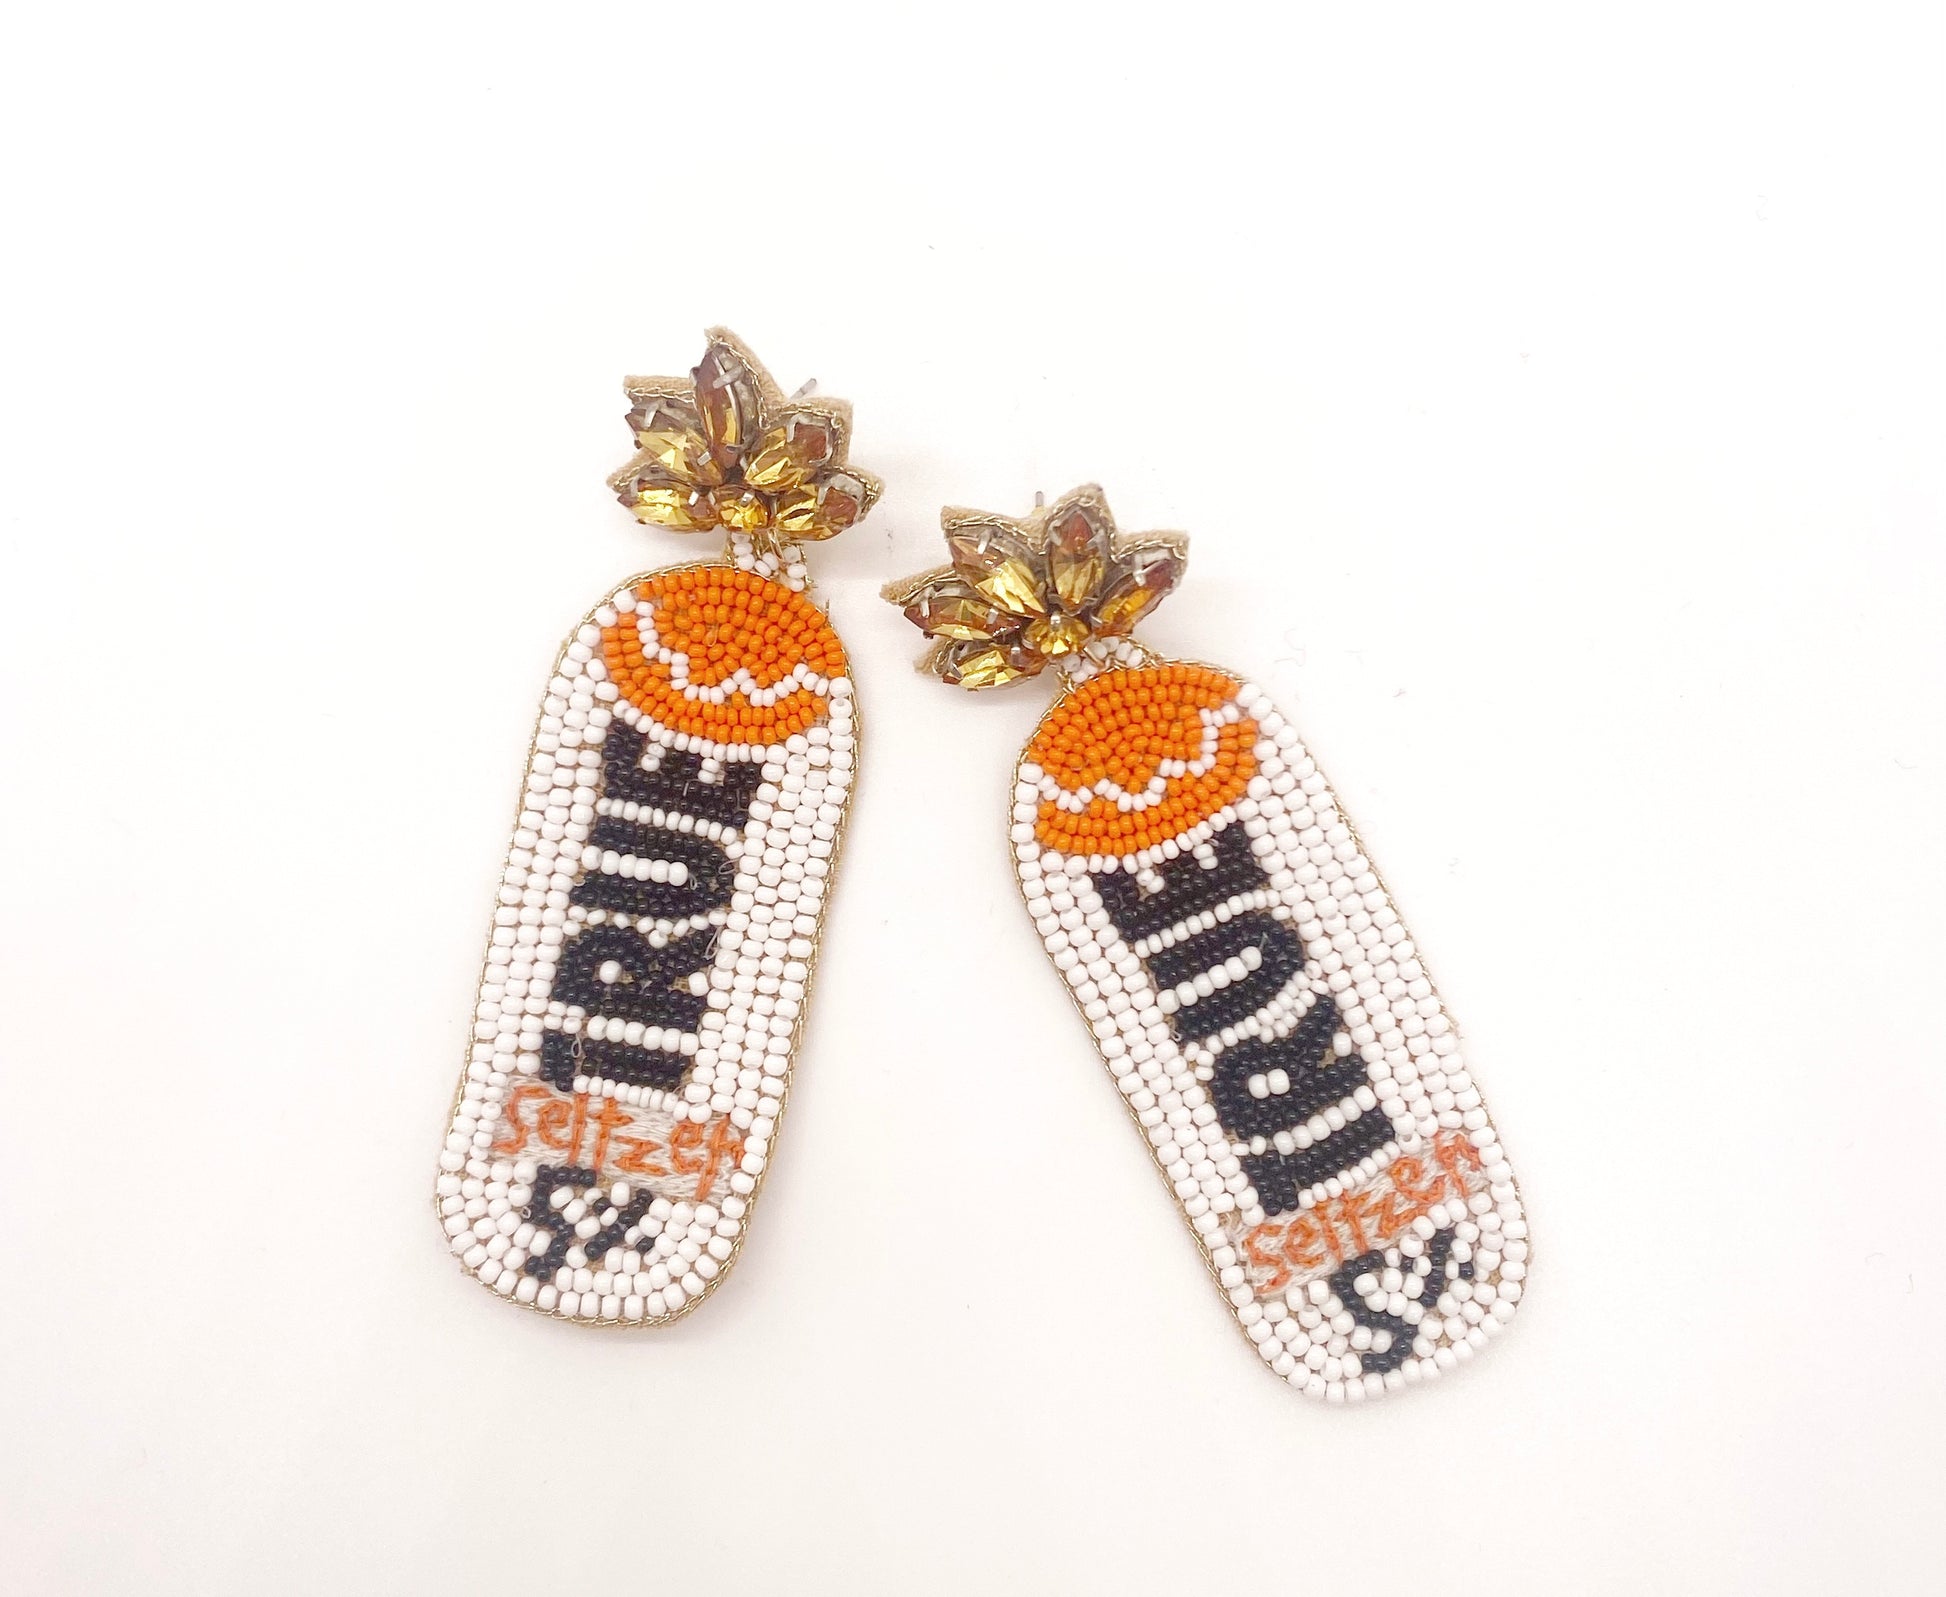 It’s True, we love a good seltzer. Pair these earrings with your favorite girl’s night out attire. The beaded detailing features the words “TRUE Seltzer 5%”. These earrings are lightweight and feature a post back.